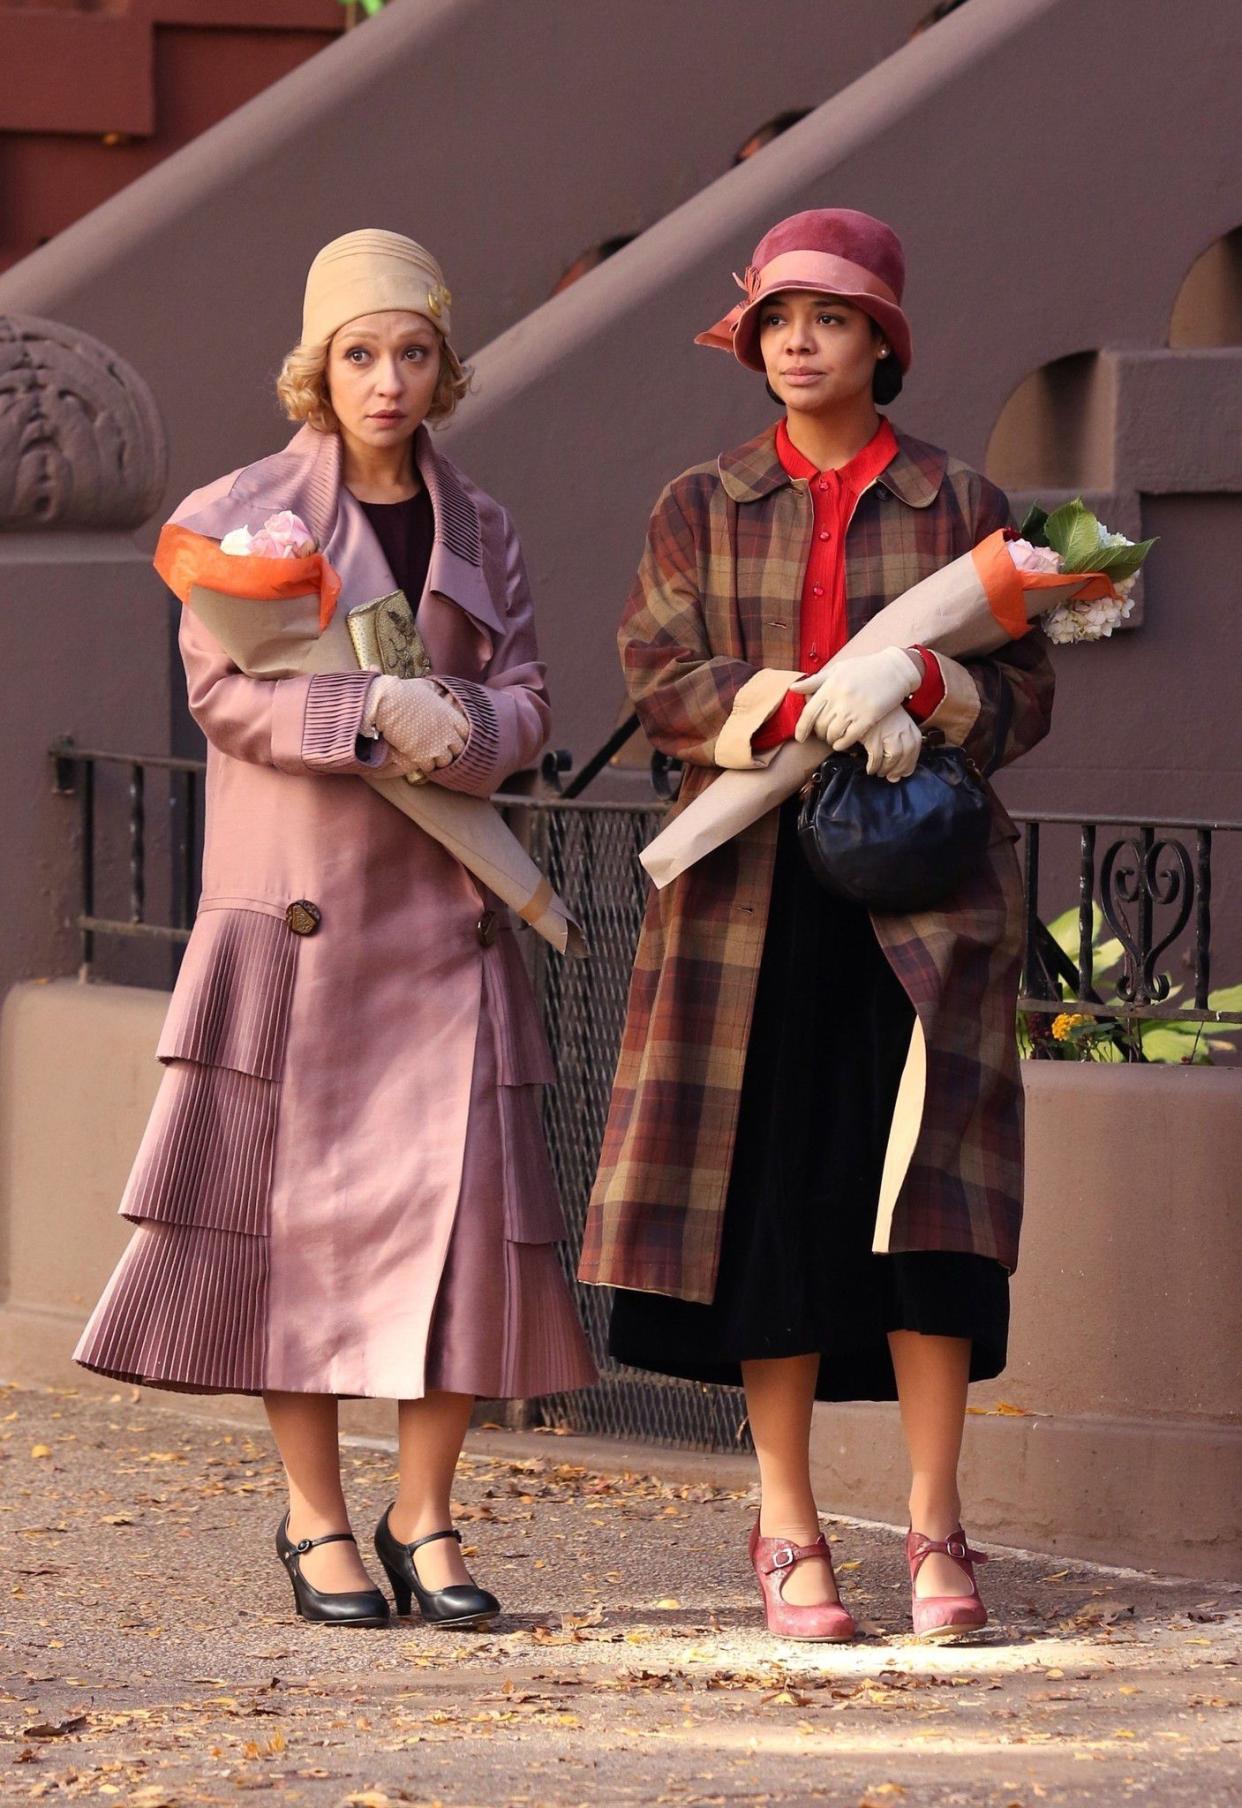 Tessa Thompson and Ruth Negga, nearly unrecognizable in character, film “Passing” in New York on Nov. 6, 2019.